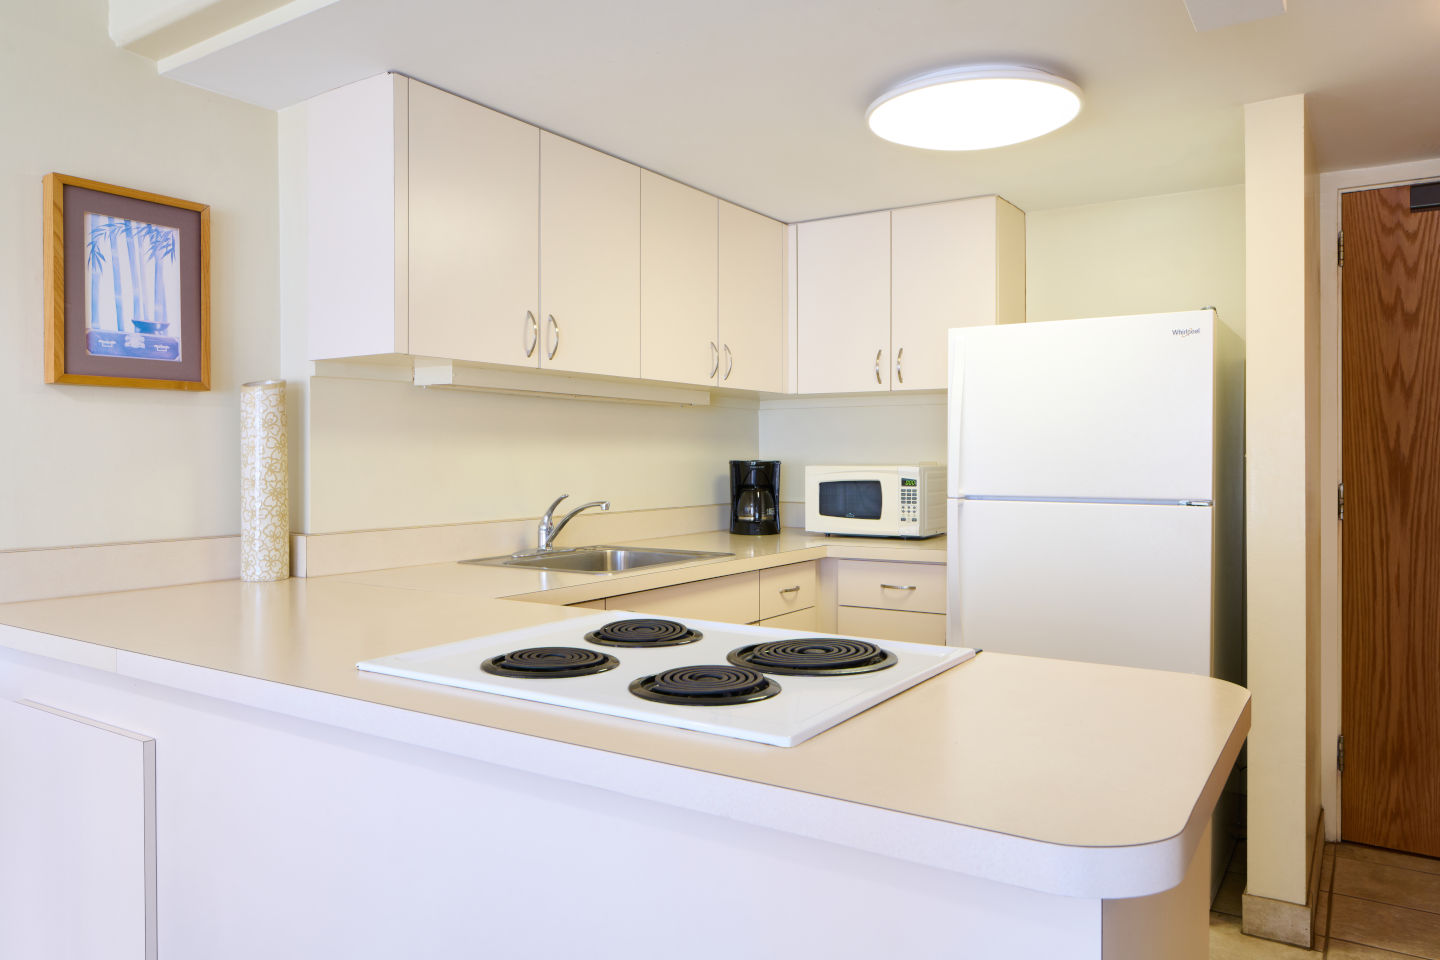 Full kitchen with a 4-burner stovetop and coffee maker, microwave, refrigerator, and lots of space to cook at the Ilikai Lite Ocean View Jr Suite 